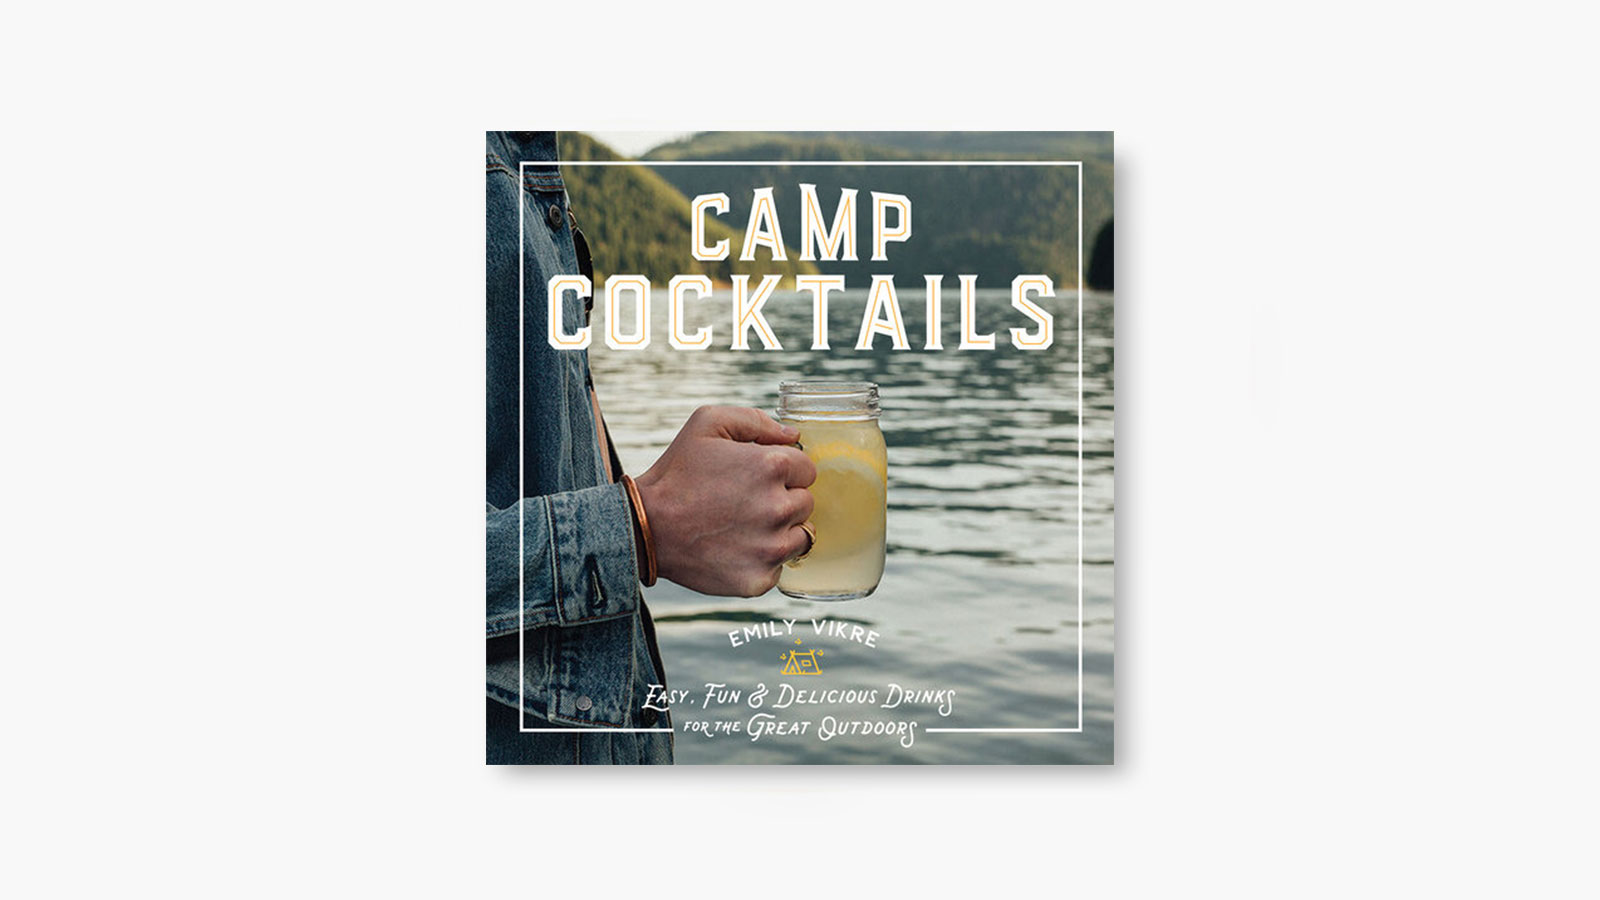 ‘Camp Cocktails’ by Emily Vikre